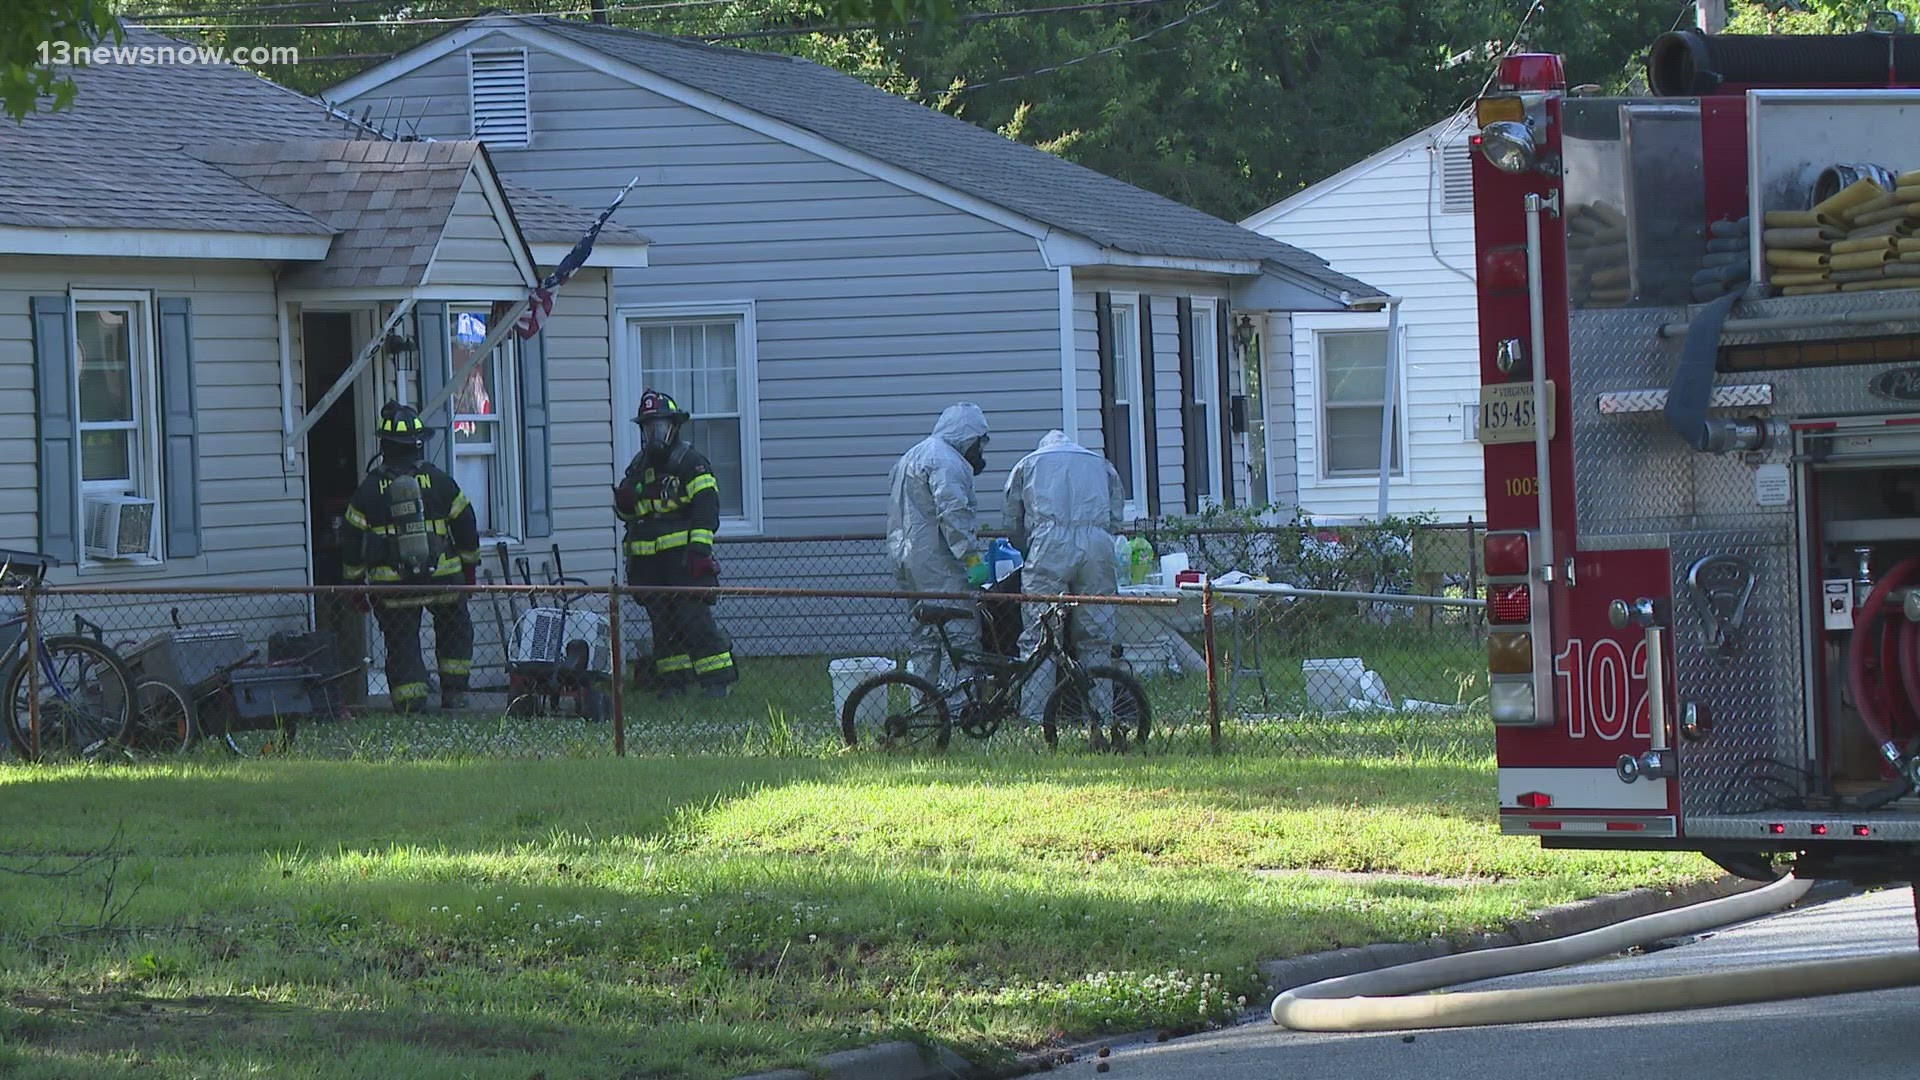 It comes after first responders answered a medical call to a suspected meth house where they also found a body.